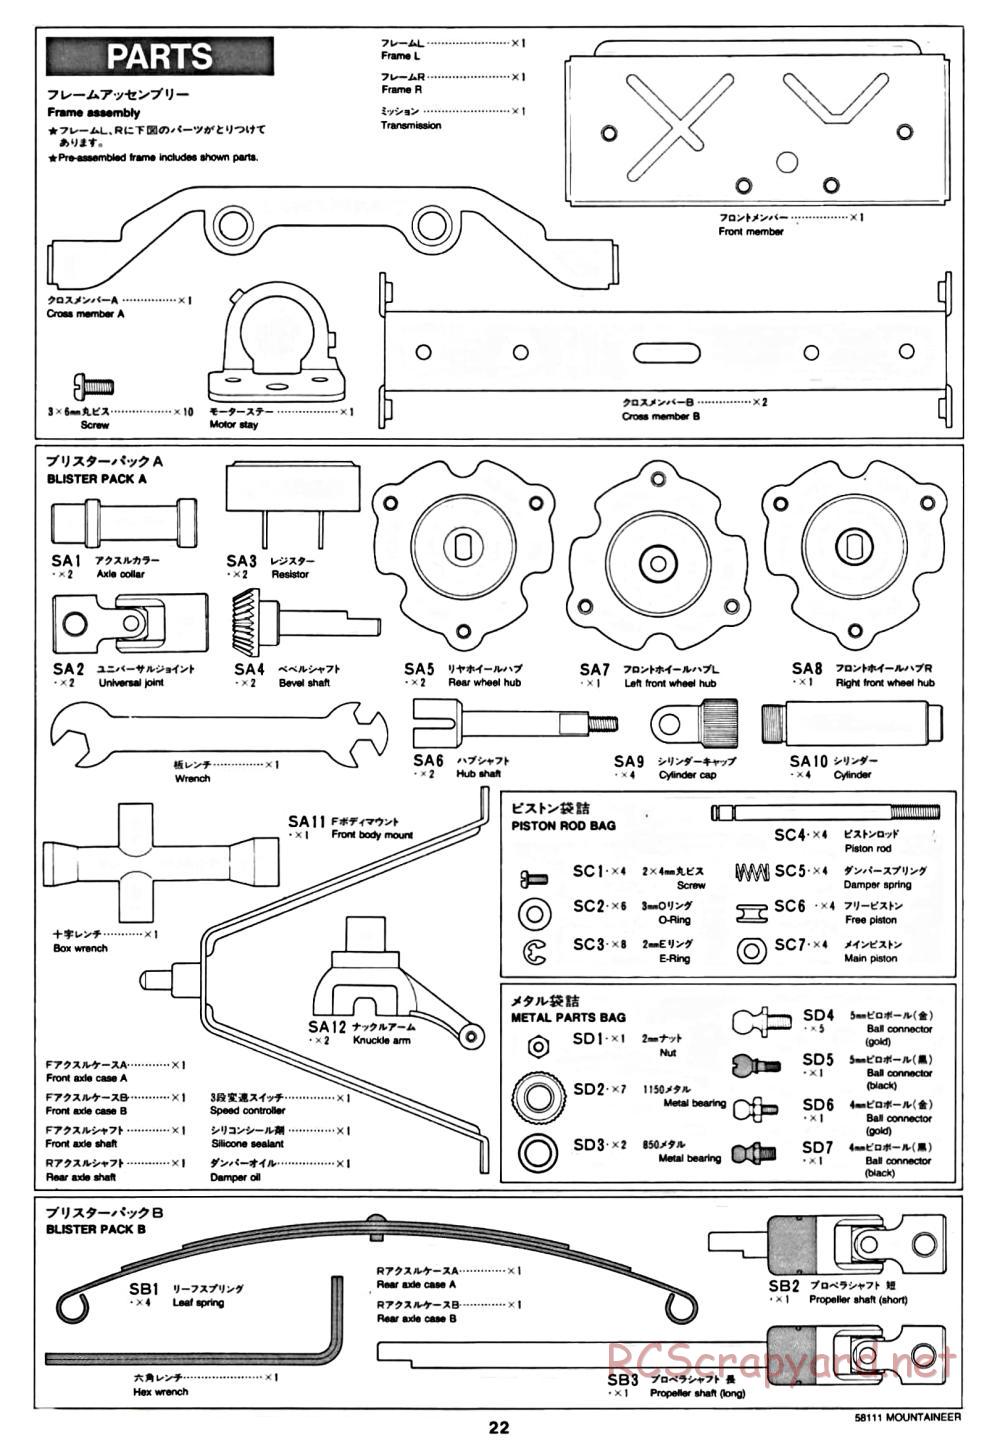 Tamiya - Toyota 4x4 Pick Up Mountaineer Chassis - Manual - Page 22